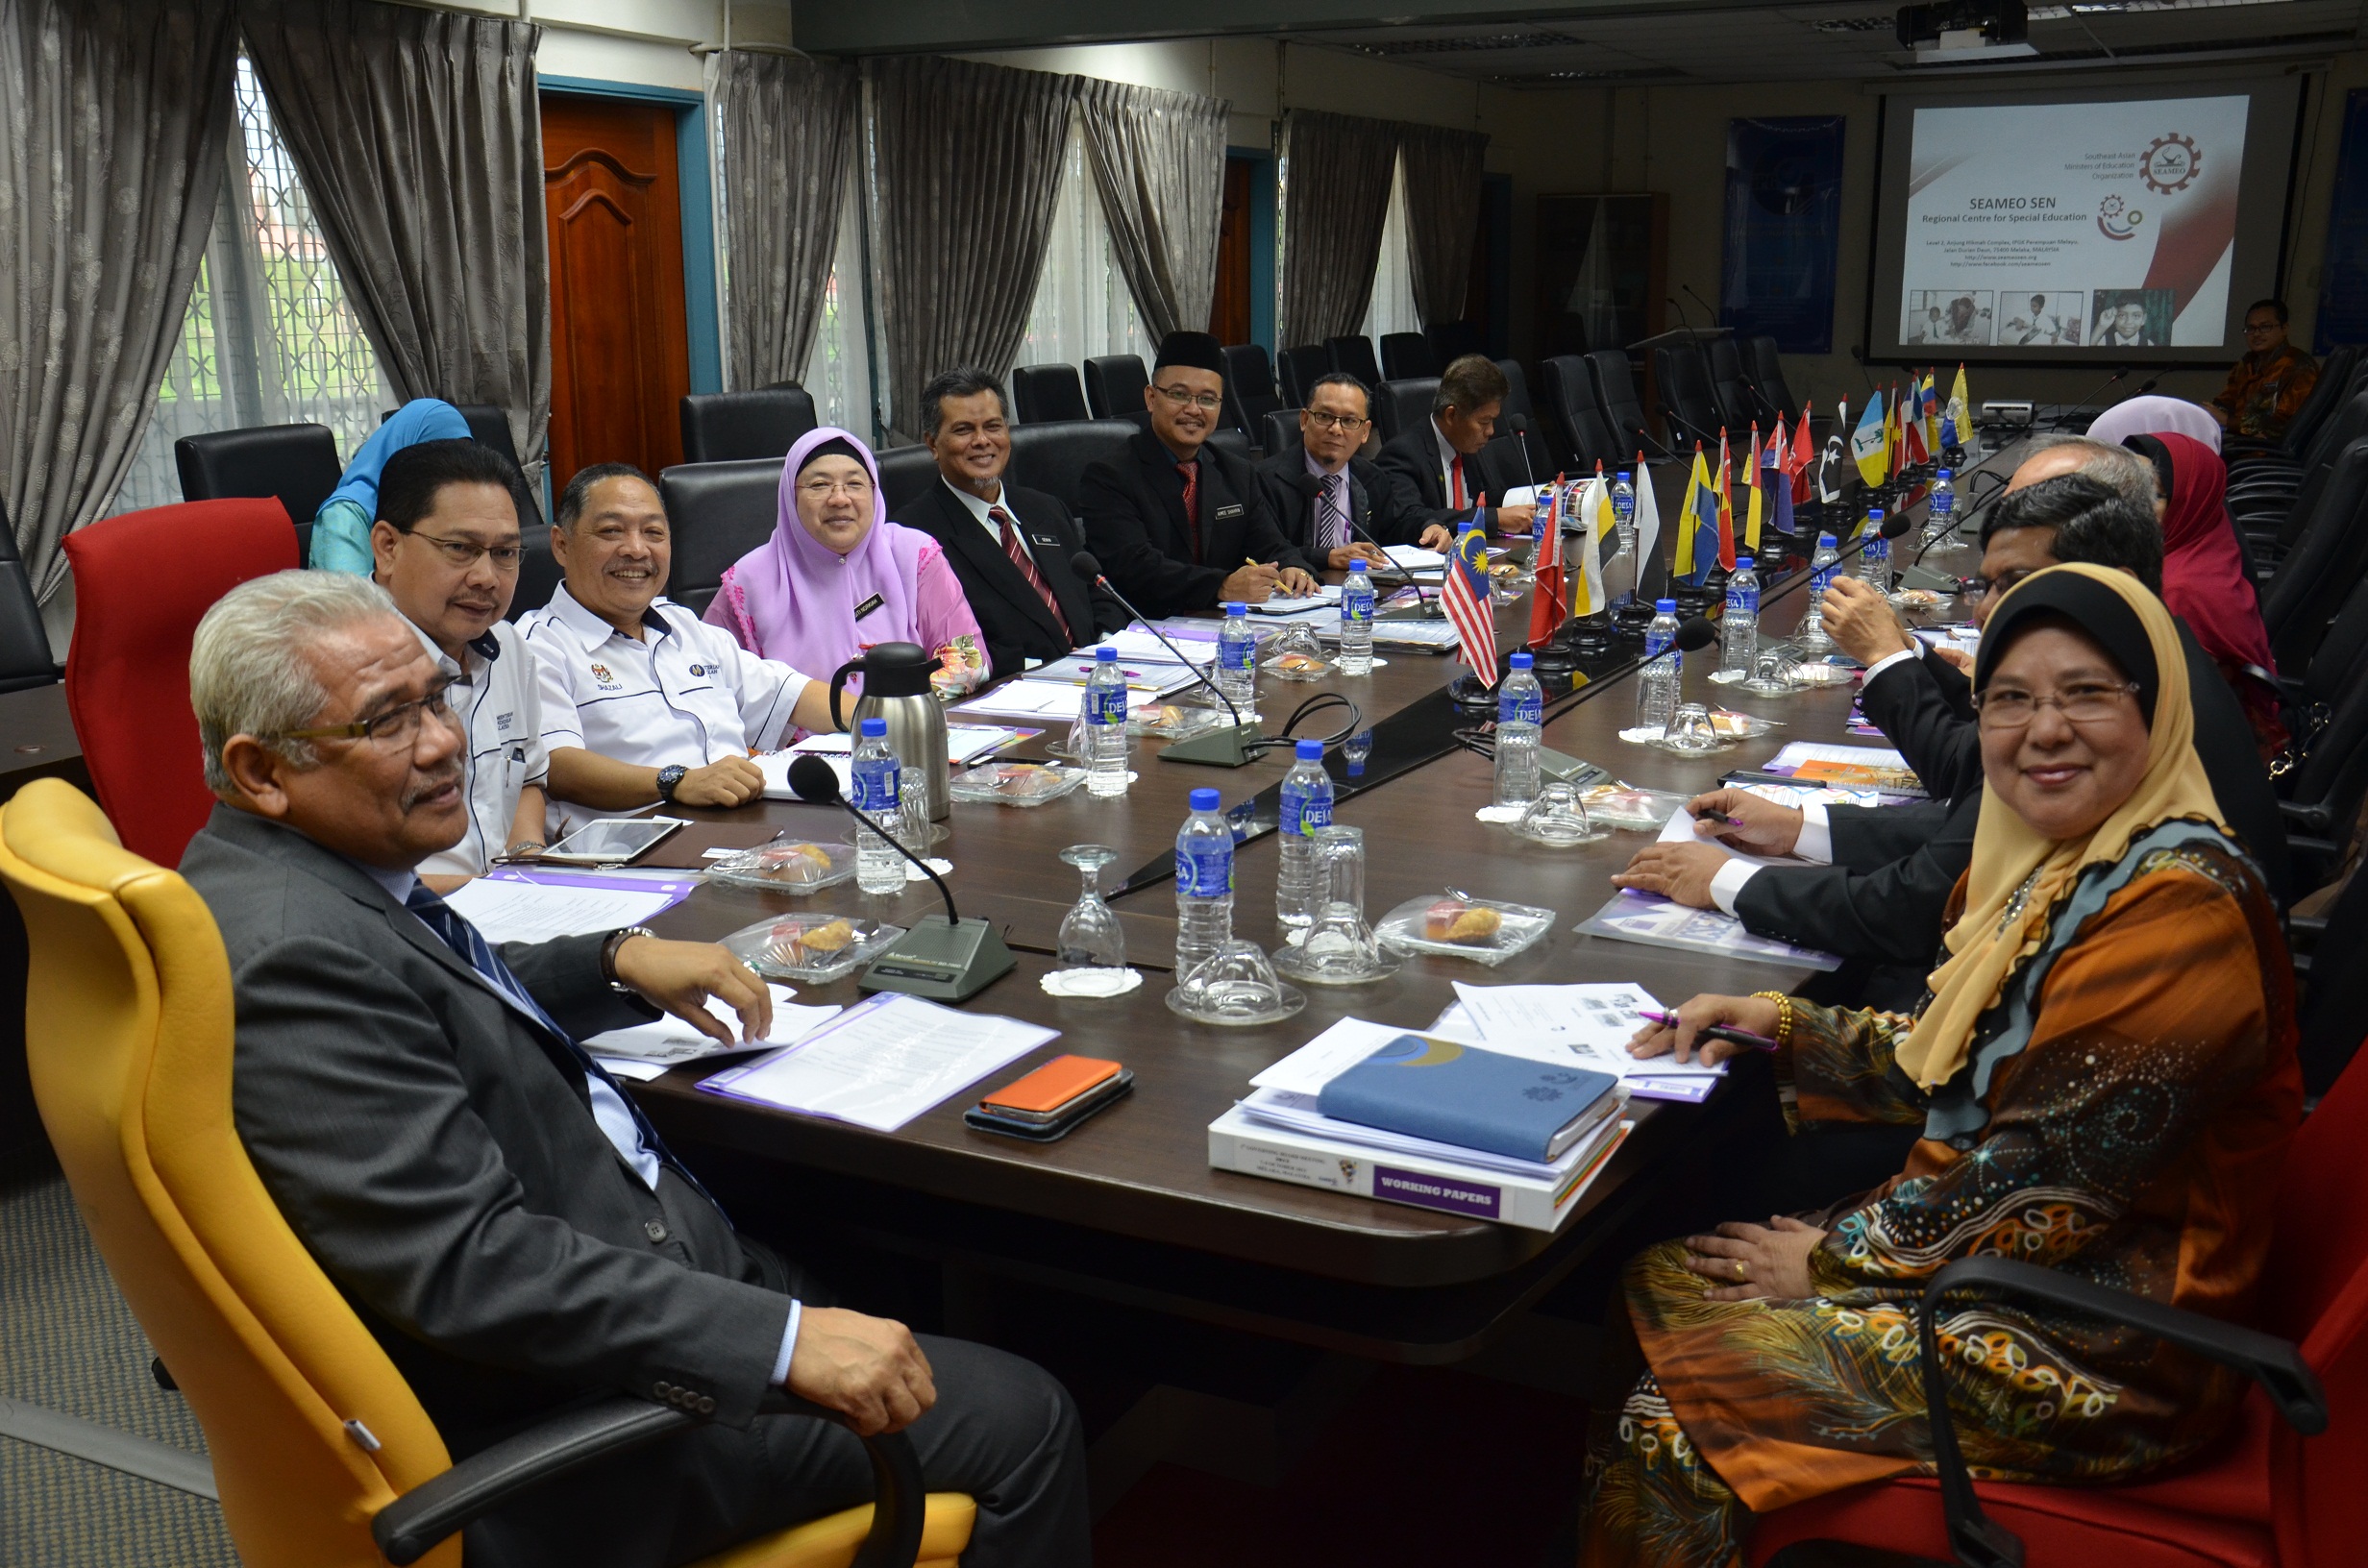 Collaboration Meeting between SEAMEO SEN and Agencies and Departments of the Ministry of Education Malaysia (KPM)